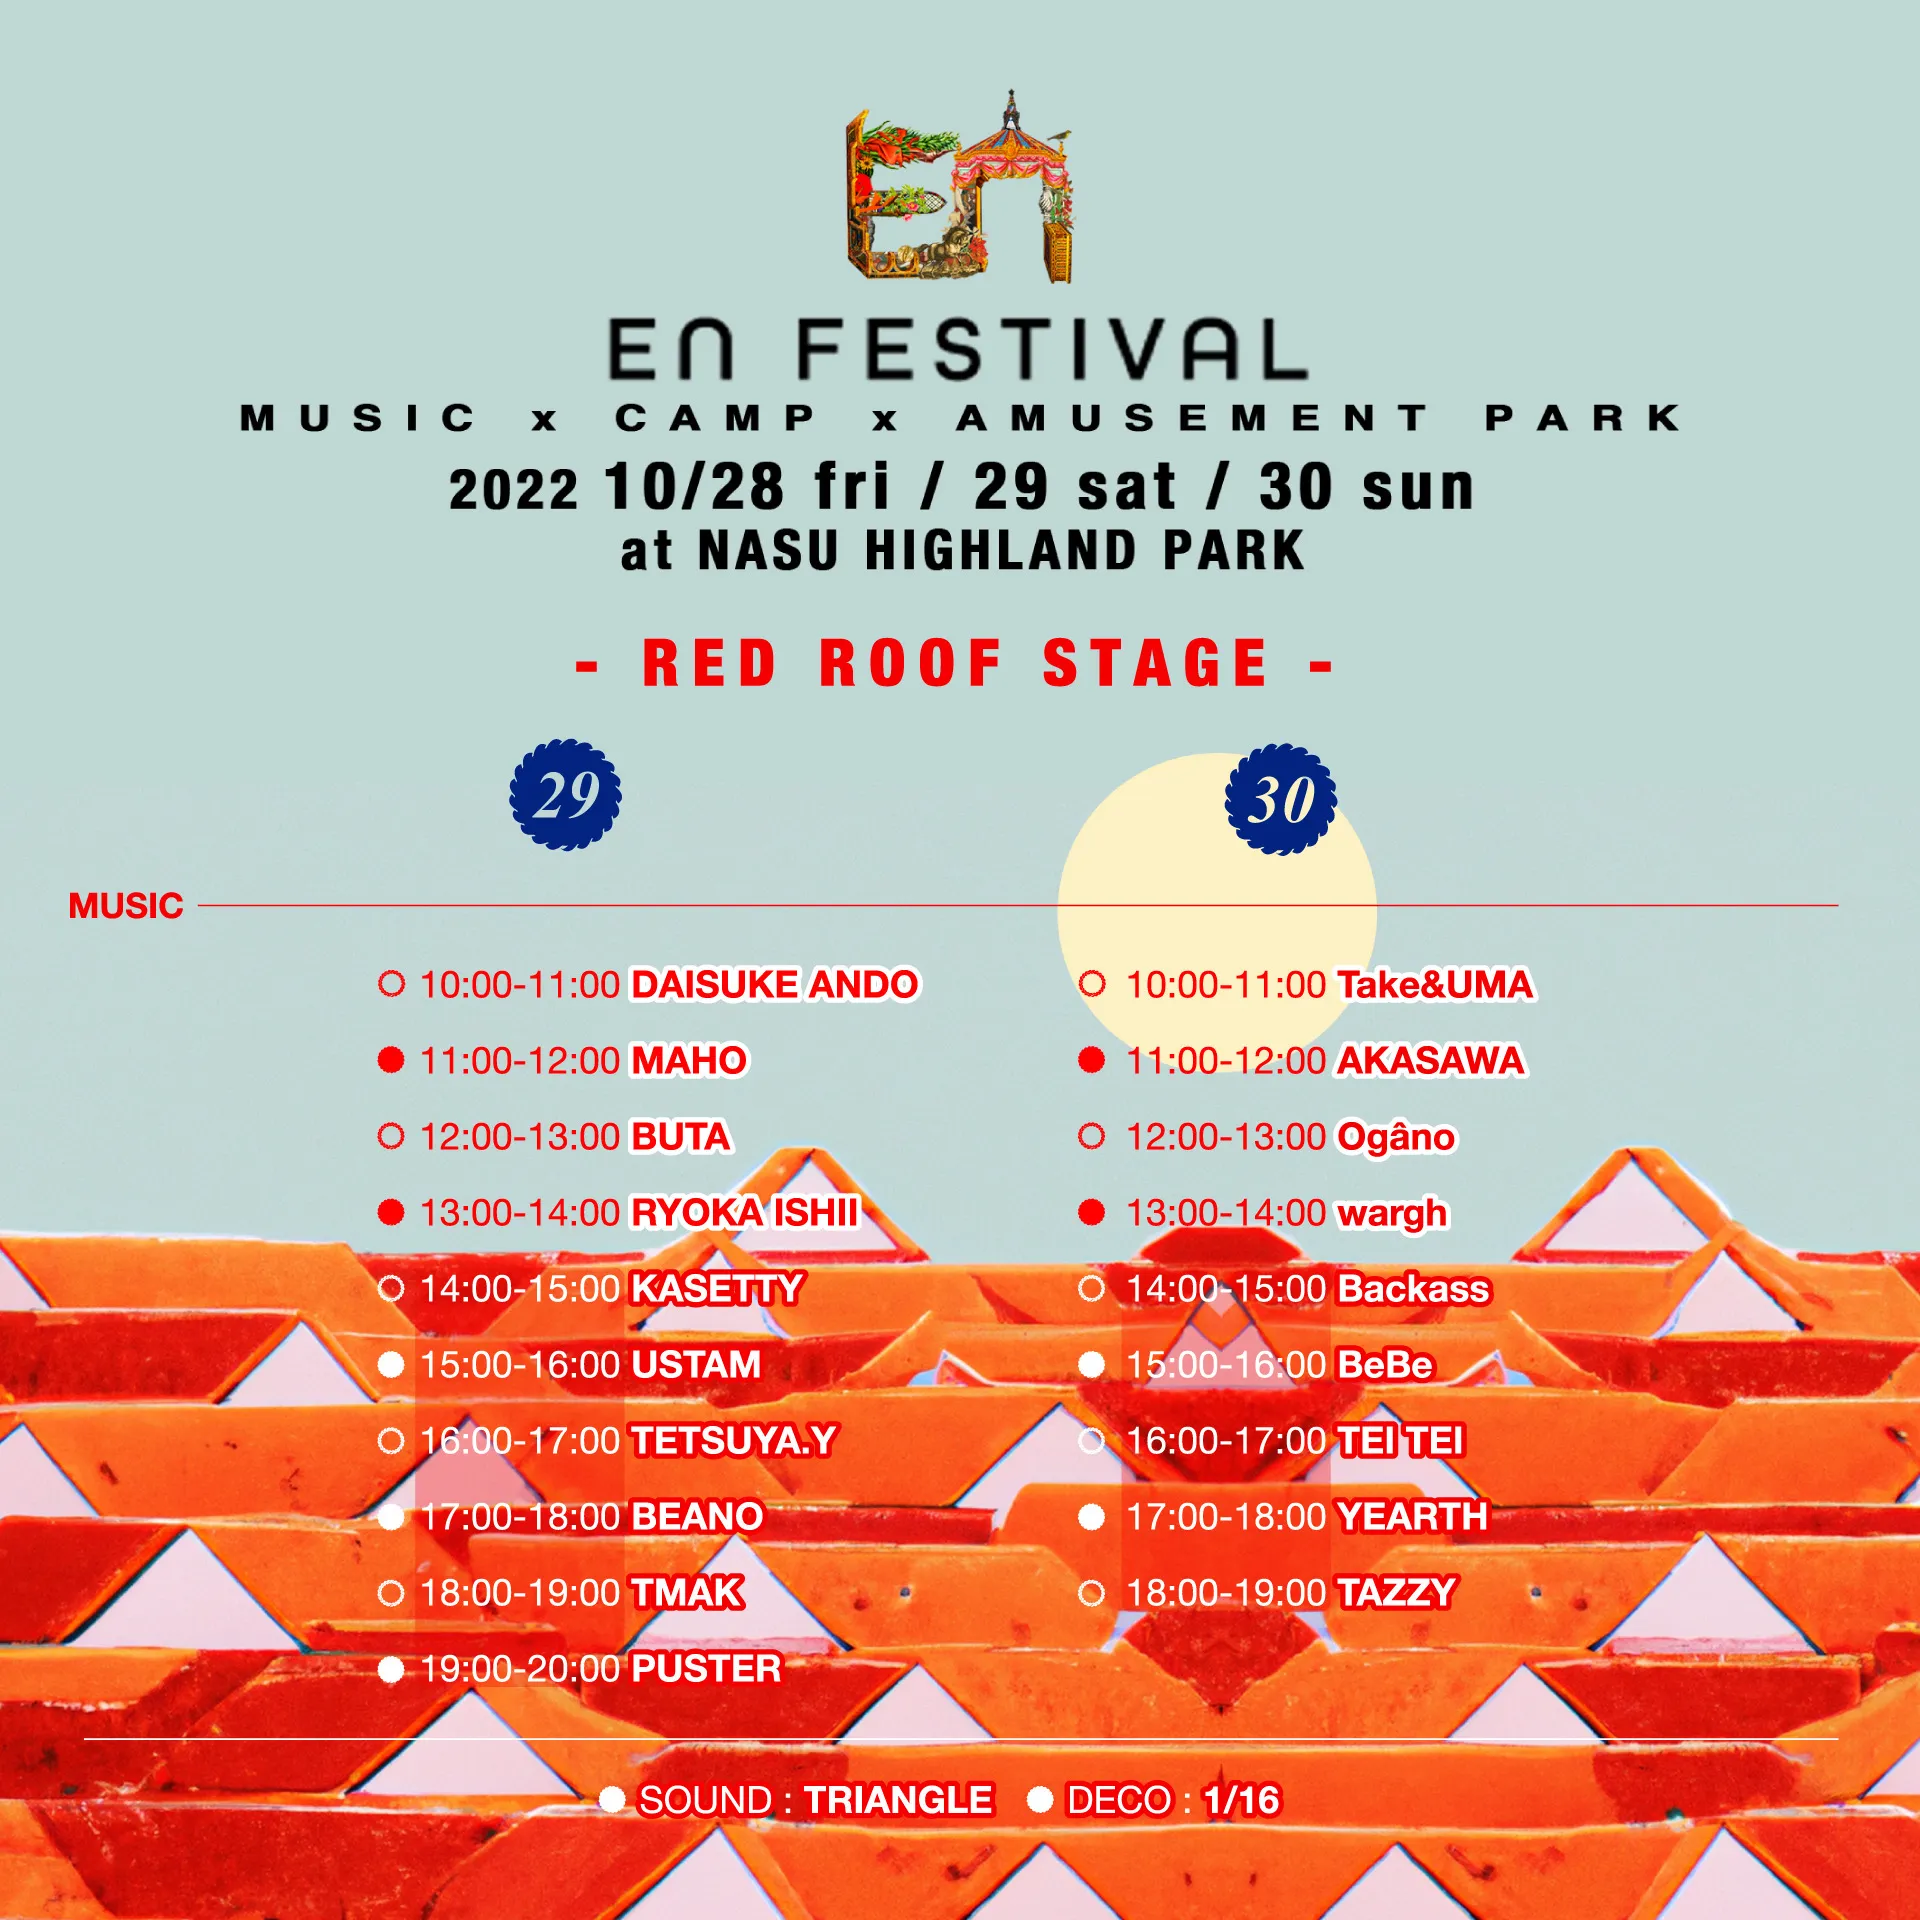 RED ROOF STAGE